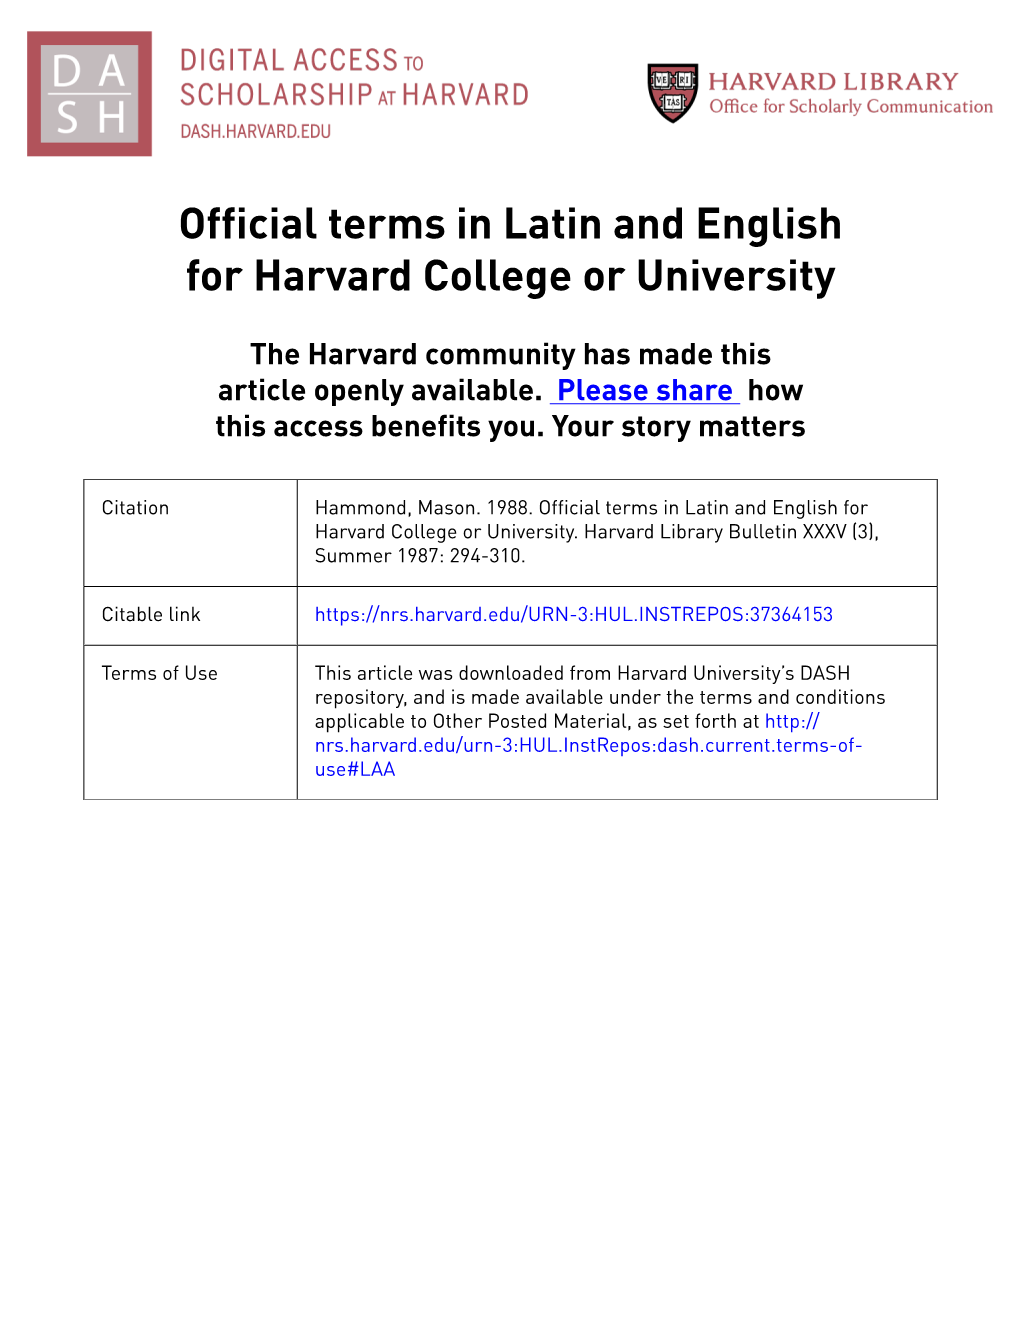 Official Terms in Latin and English for Harvard College Or University